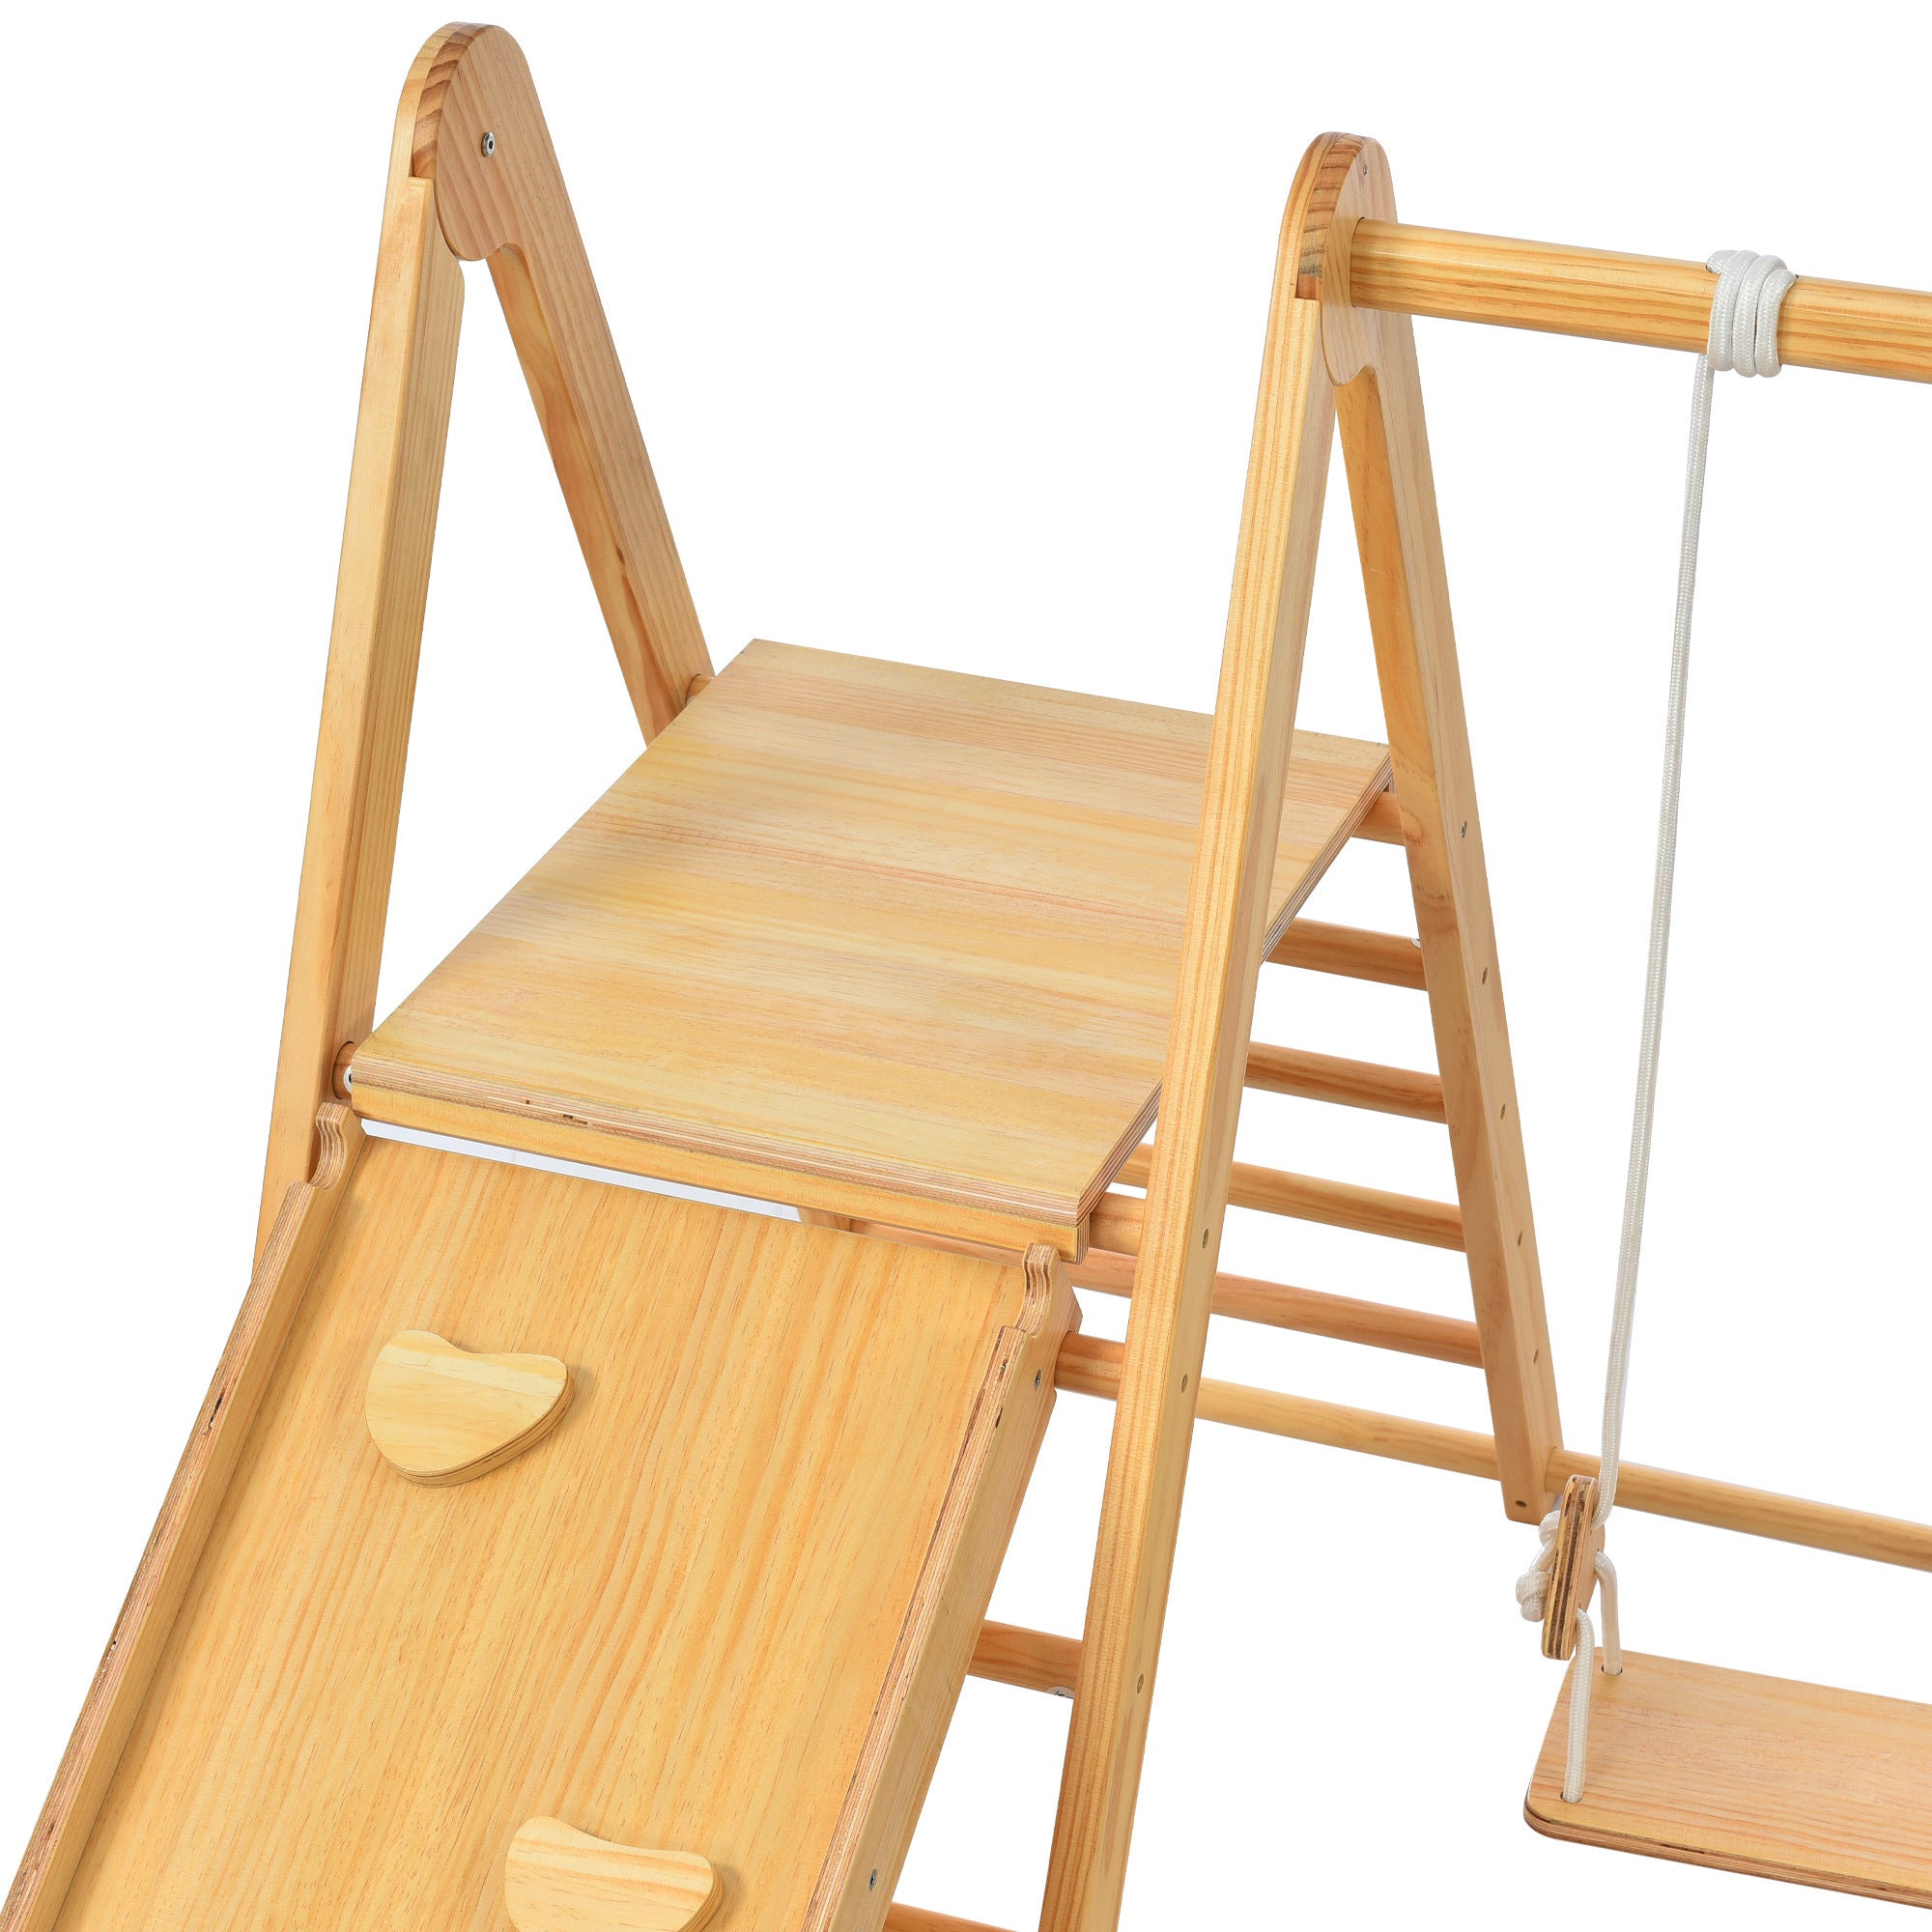 Wooden Swing and Slide Set Indoor Foldable Climbing Playground Play set for Kids/Toddlers